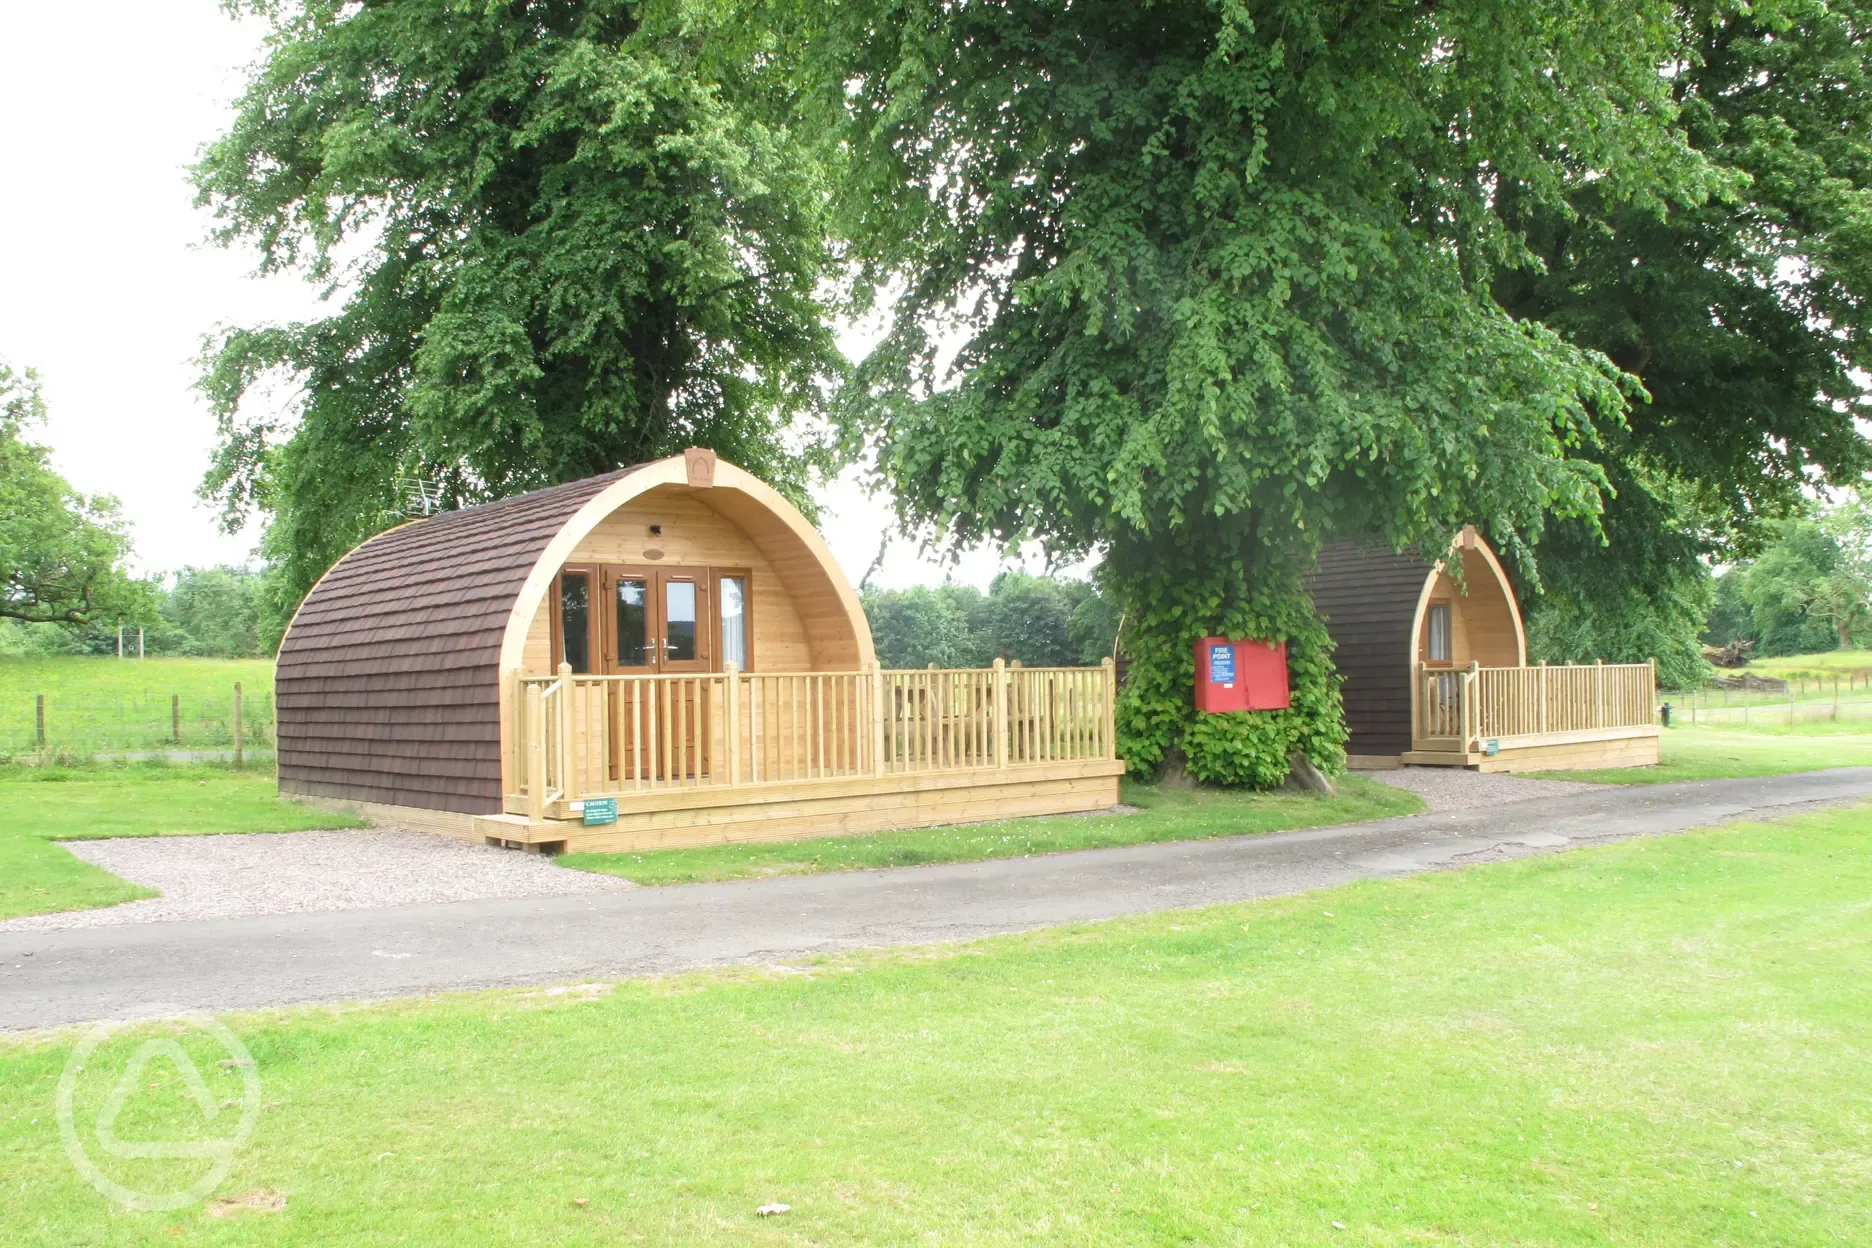 Glamping Pods at Callander Woods, Perthshire